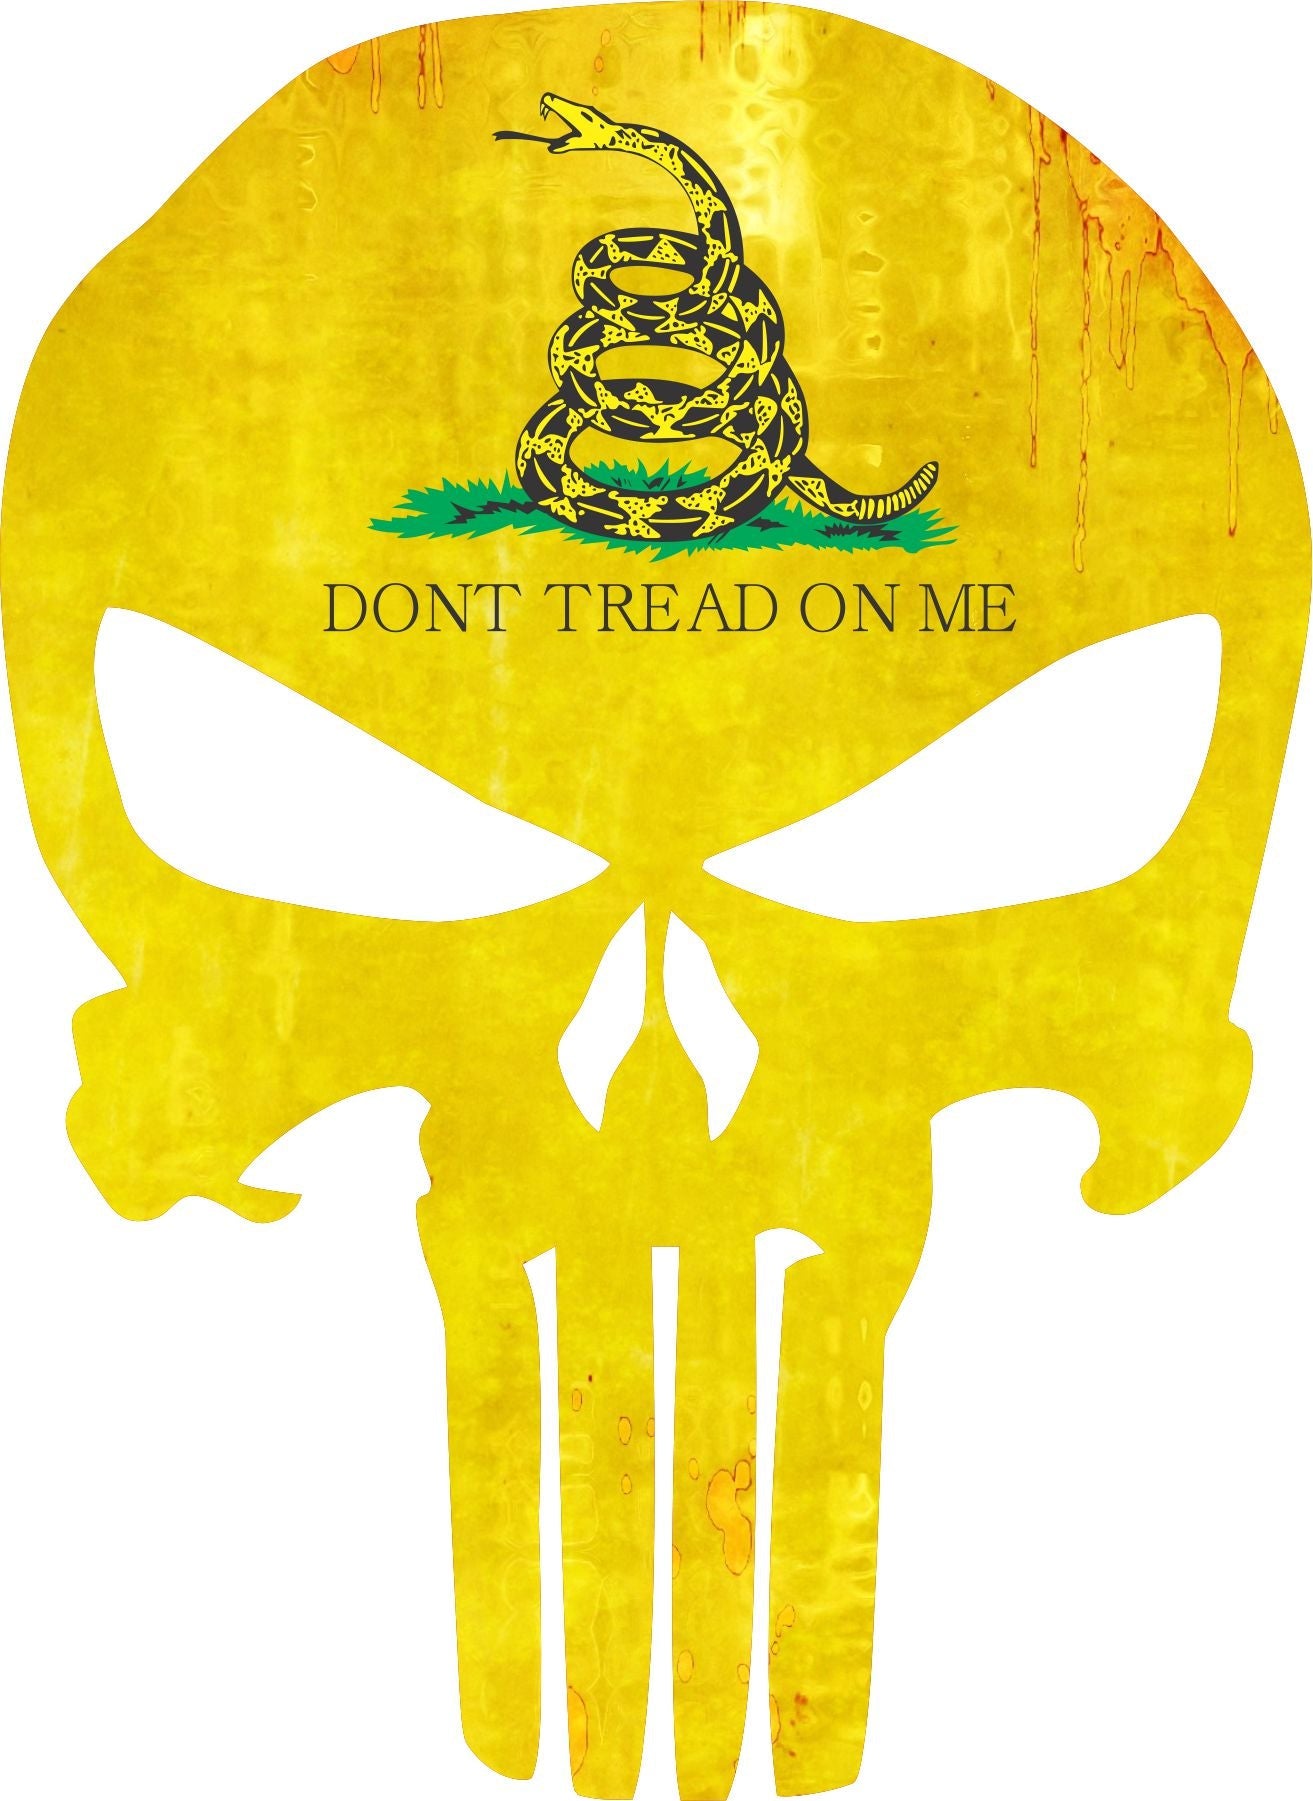 Punisher Skull Decal - Don't Tread on Me Window Decal - Various Size Free Ship - Powercall Sirens LLC